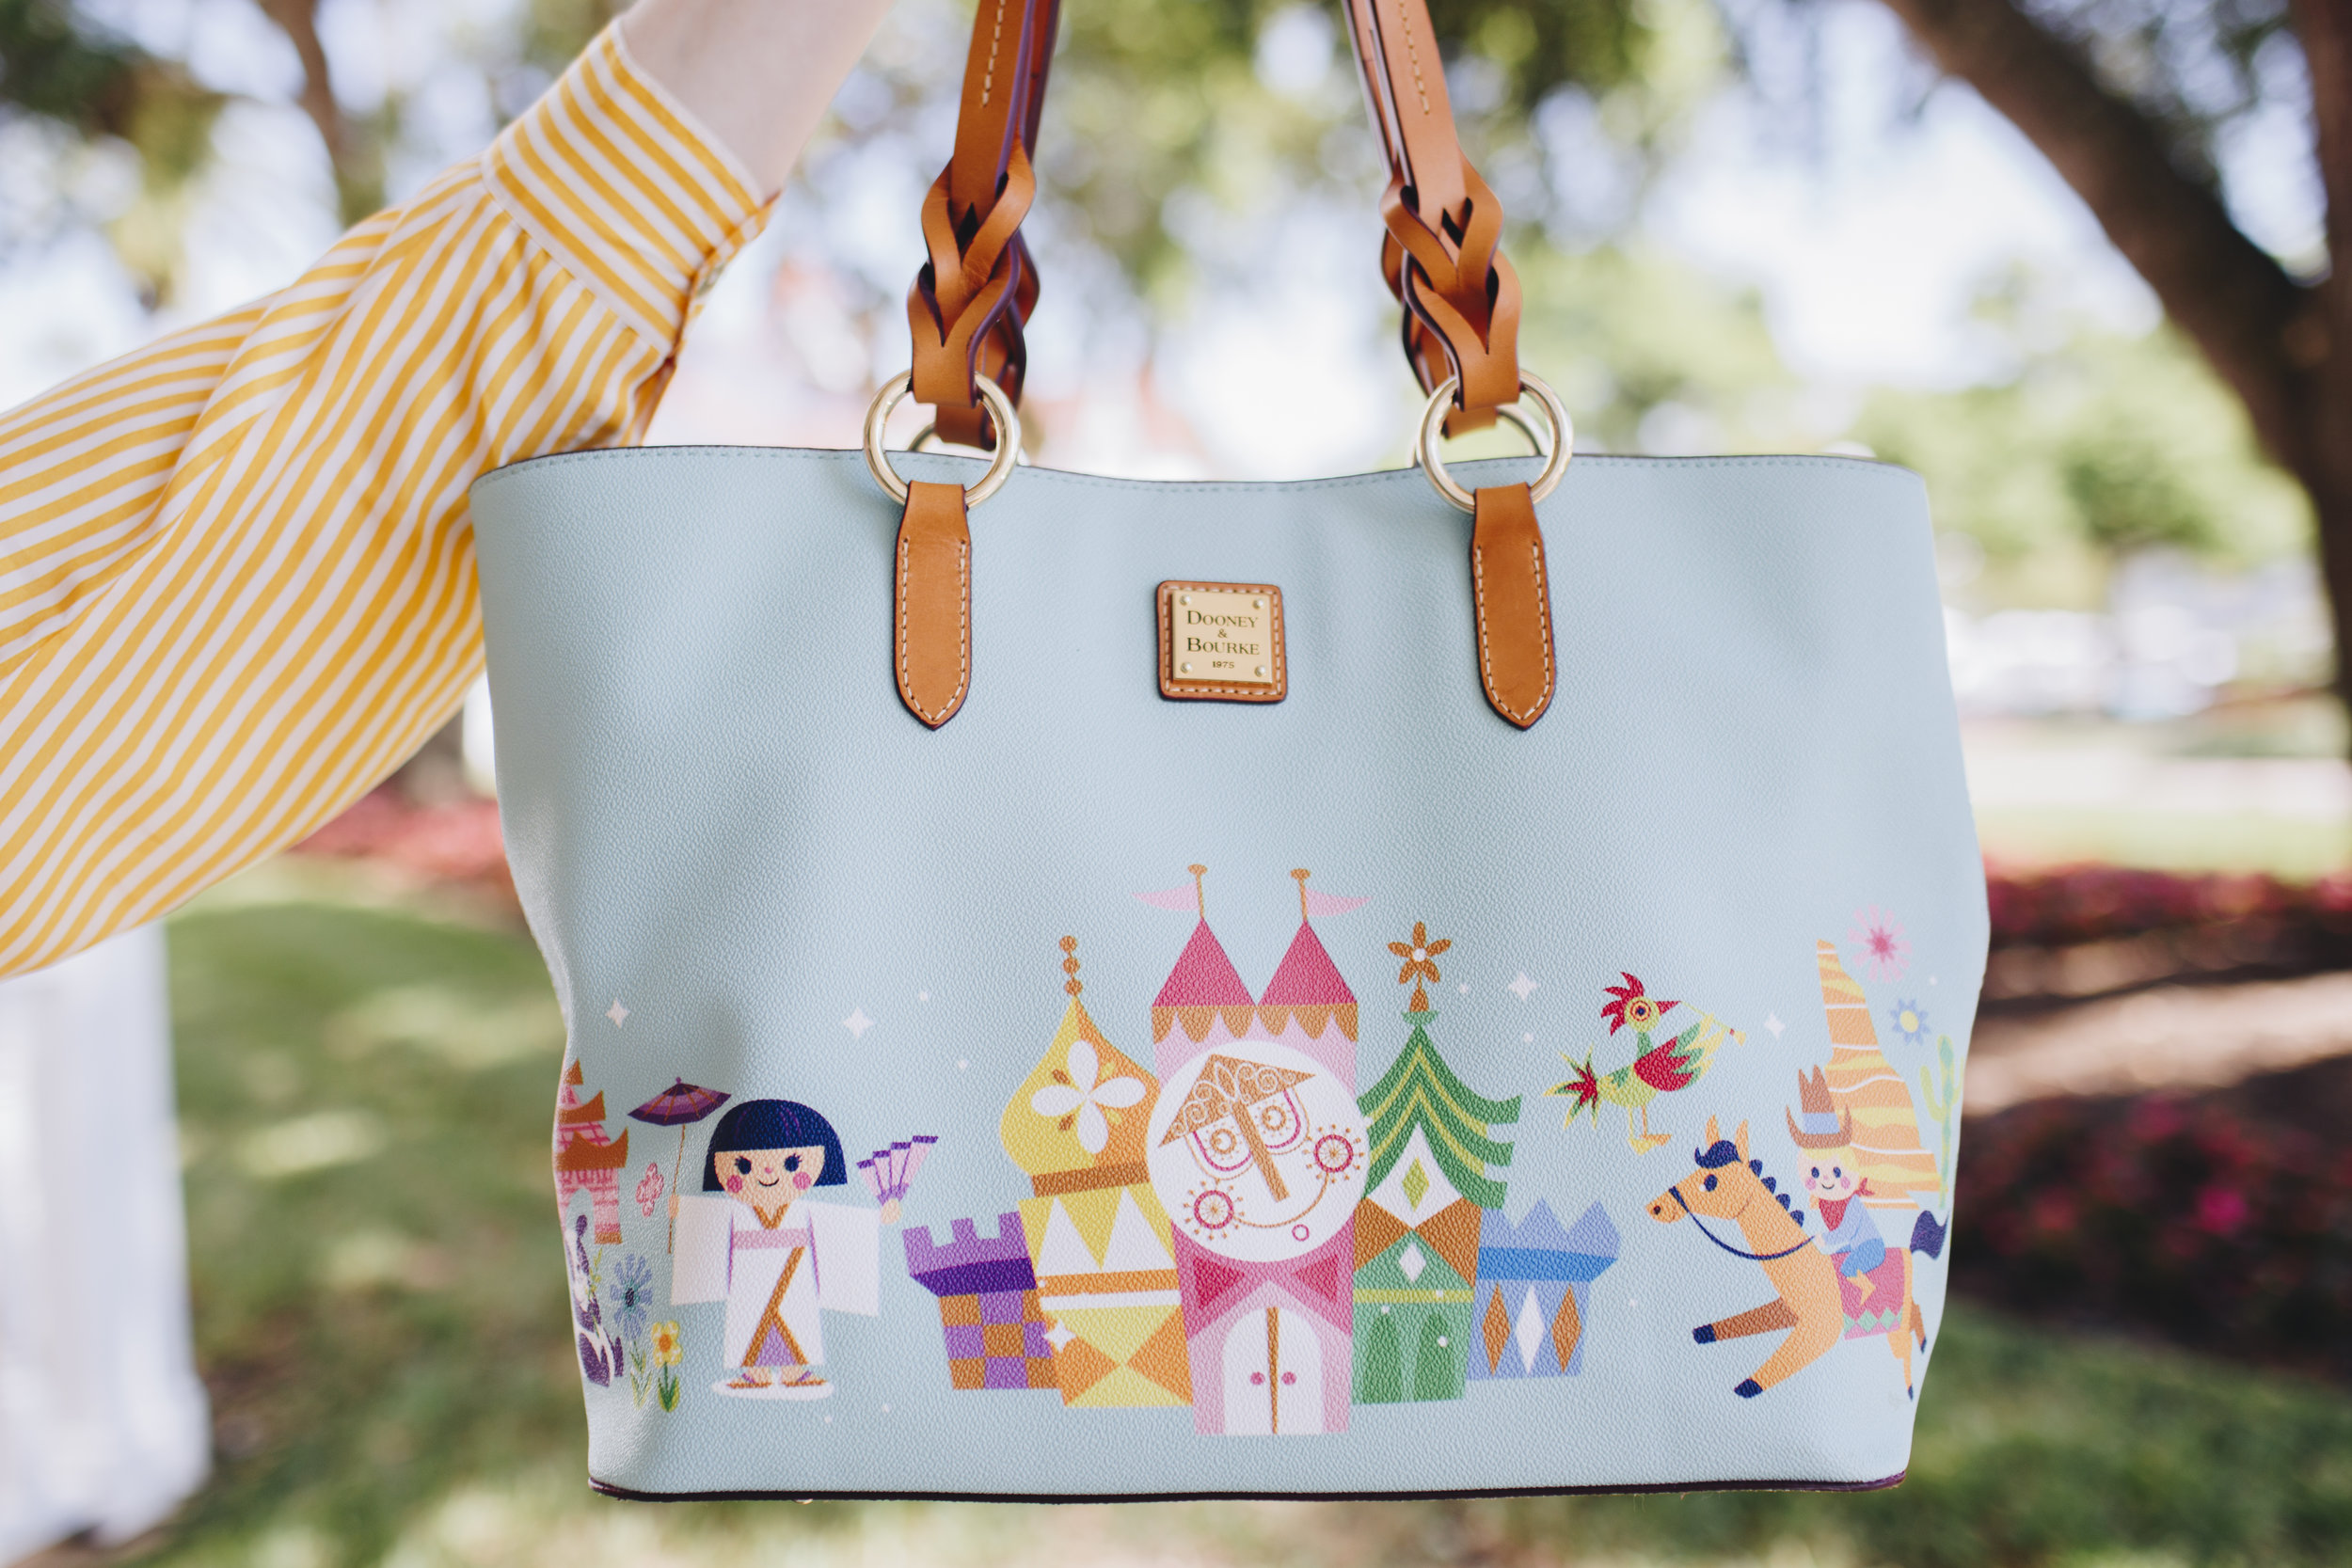 Dooney & Bourke, It's a Small World Tote